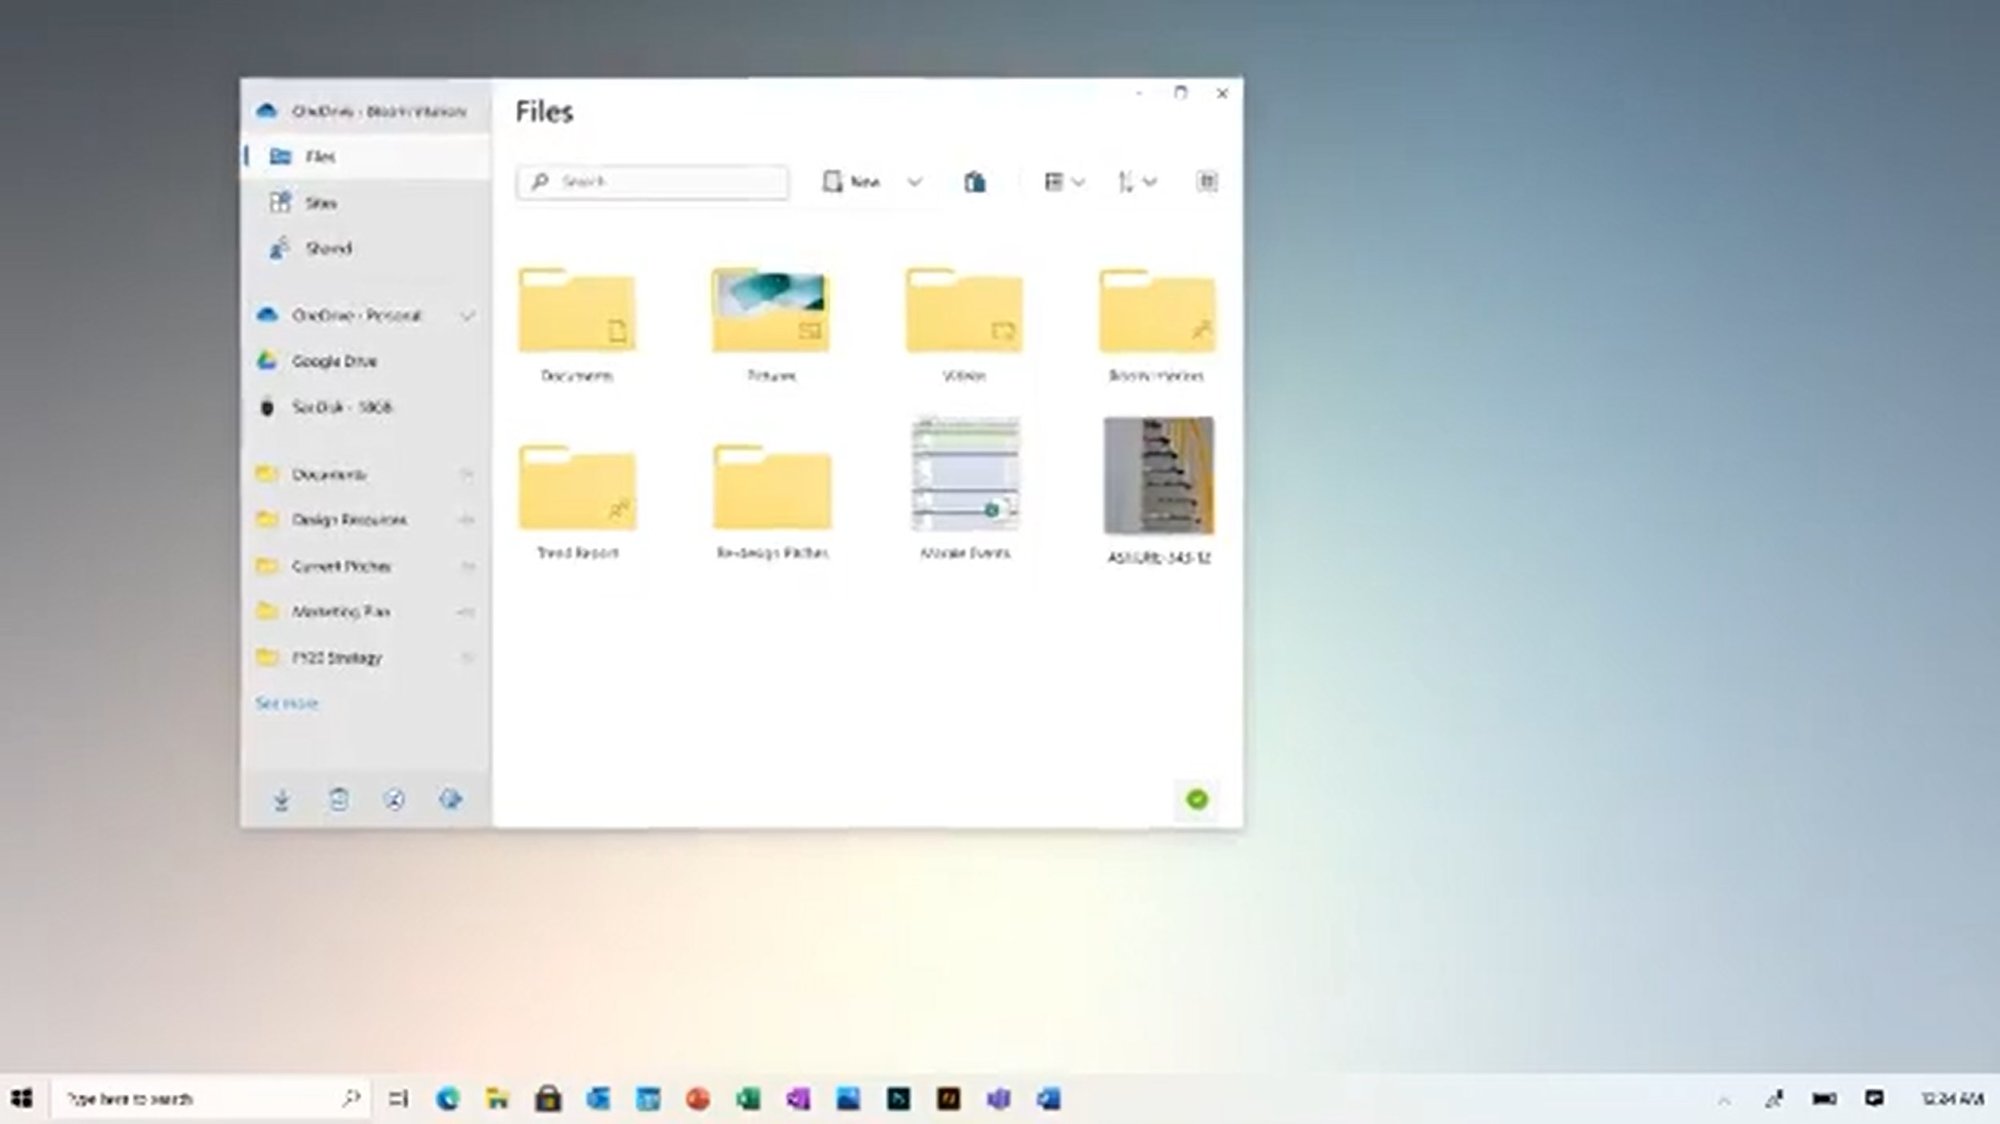 Microsoft teases a new and modern UI for Windows 10 Files.jpg